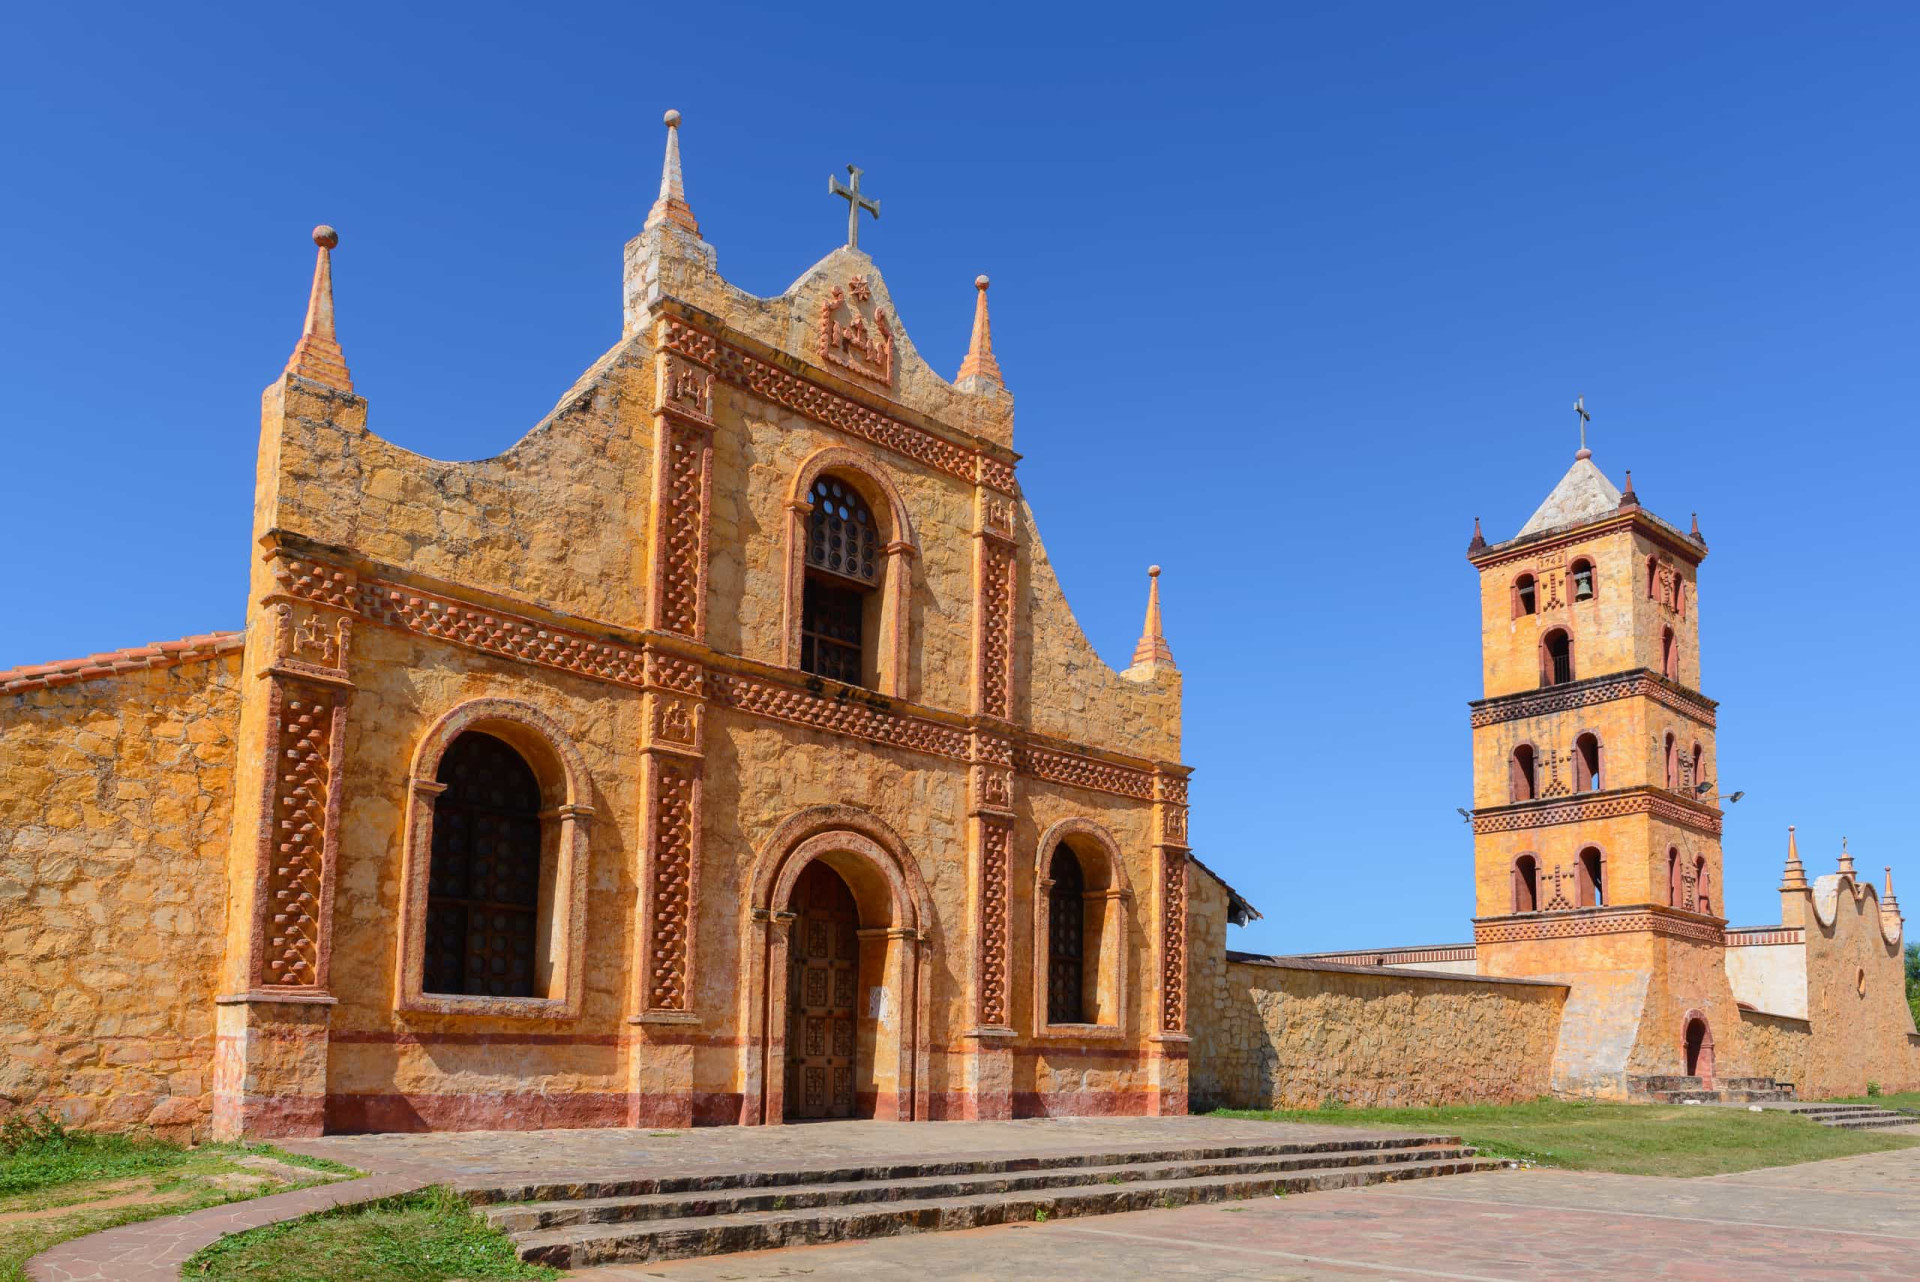 Location: Santa Cruz Department<br>Criteria: Cultural<br>Year established: 1990<br>Description: Comprised of six 17th- and 18th-century Jesuit settlements, the churches of which are the standout features, Chiquitos represents the blending of indigenous and European architectural traditions.<p><a href="https://www.msn.com/en-us/community/channel/vid-7xx8mnucu55yw63we9va2gwr7uihbxwc68fxqp25x6tg4ftibpra?cvid=94631541bc0f4f89bfd59158d696ad7e">Follow us and access great exclusive content every day</a></p>